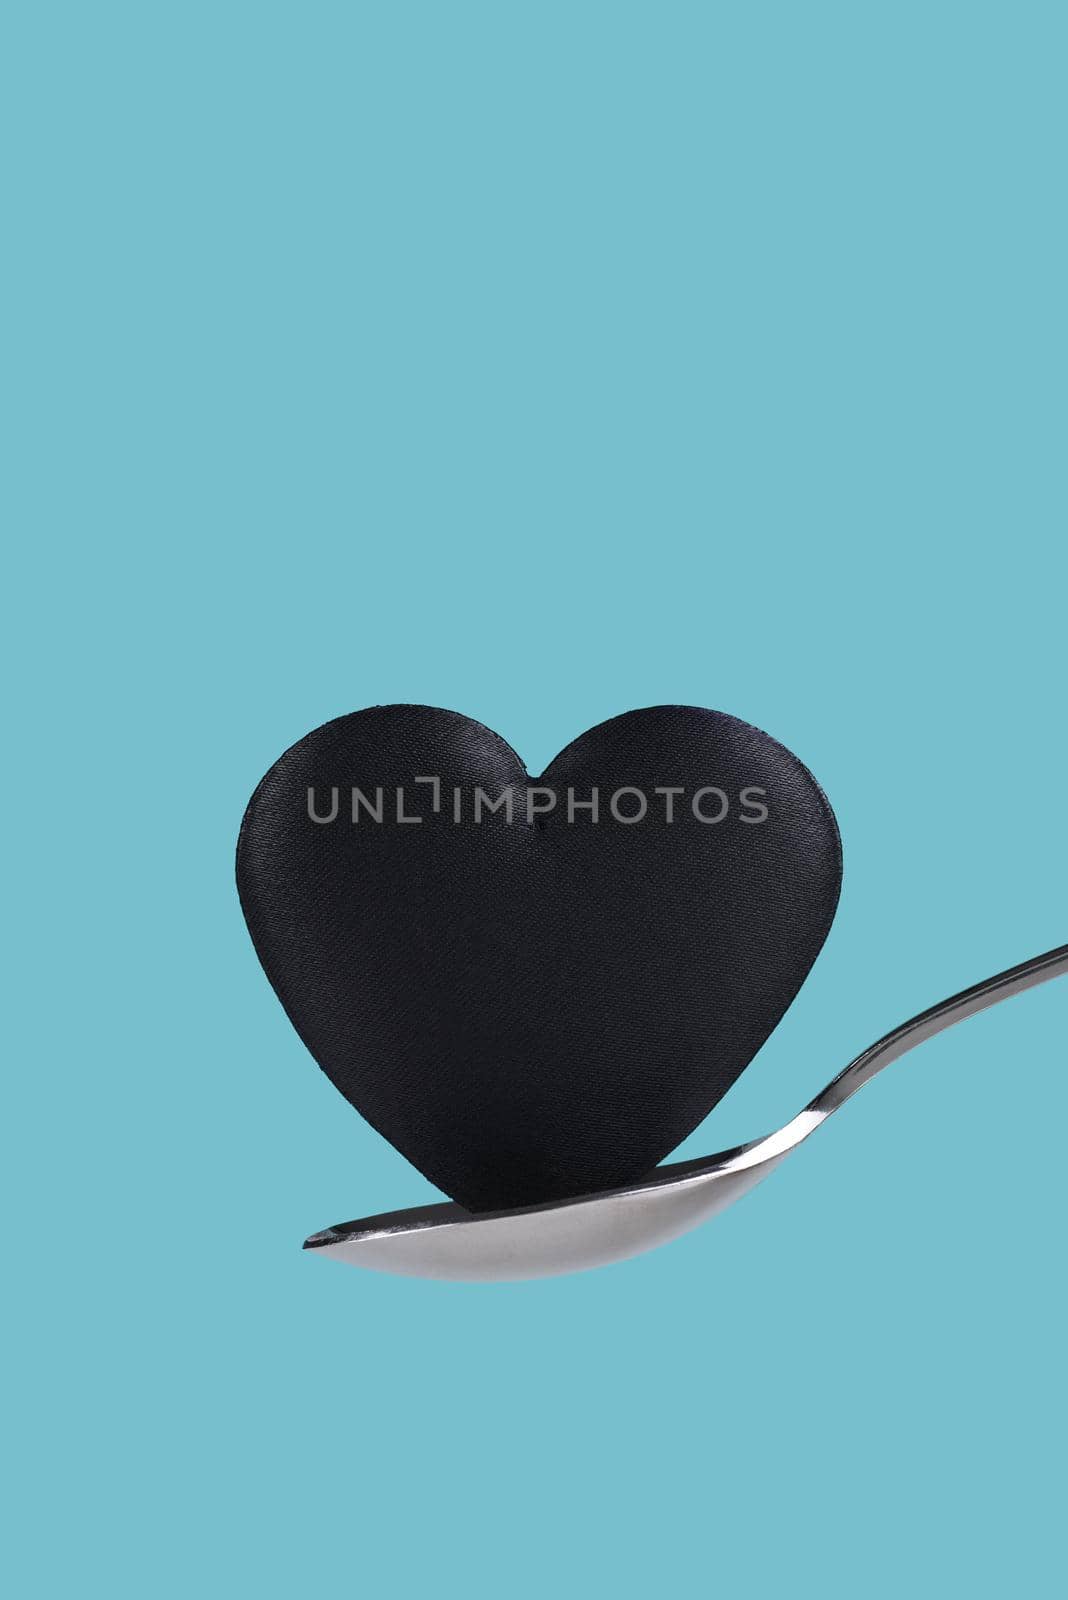 A black heart balanced on a spoon over a teal background.